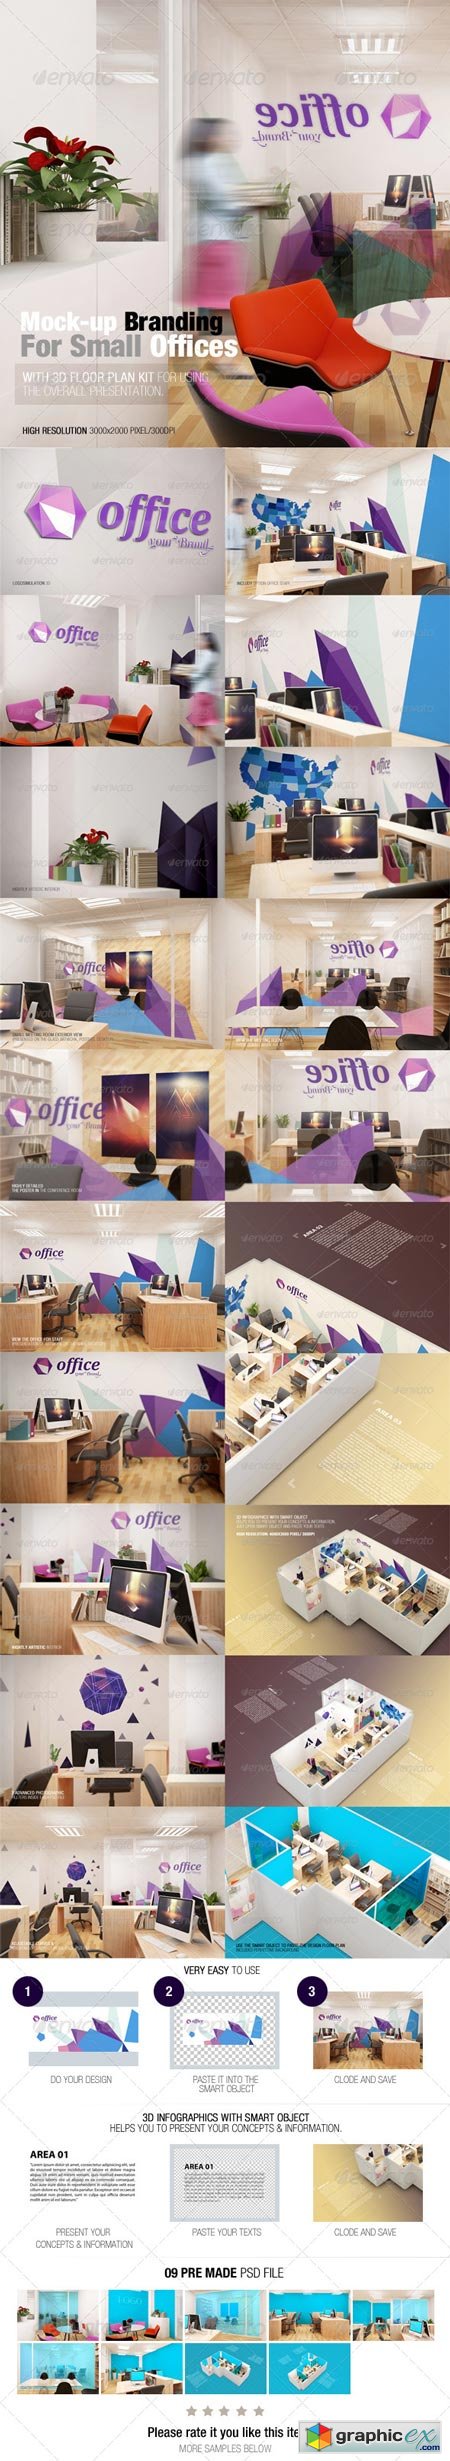 Mockup Branding For Small Offices 7688046